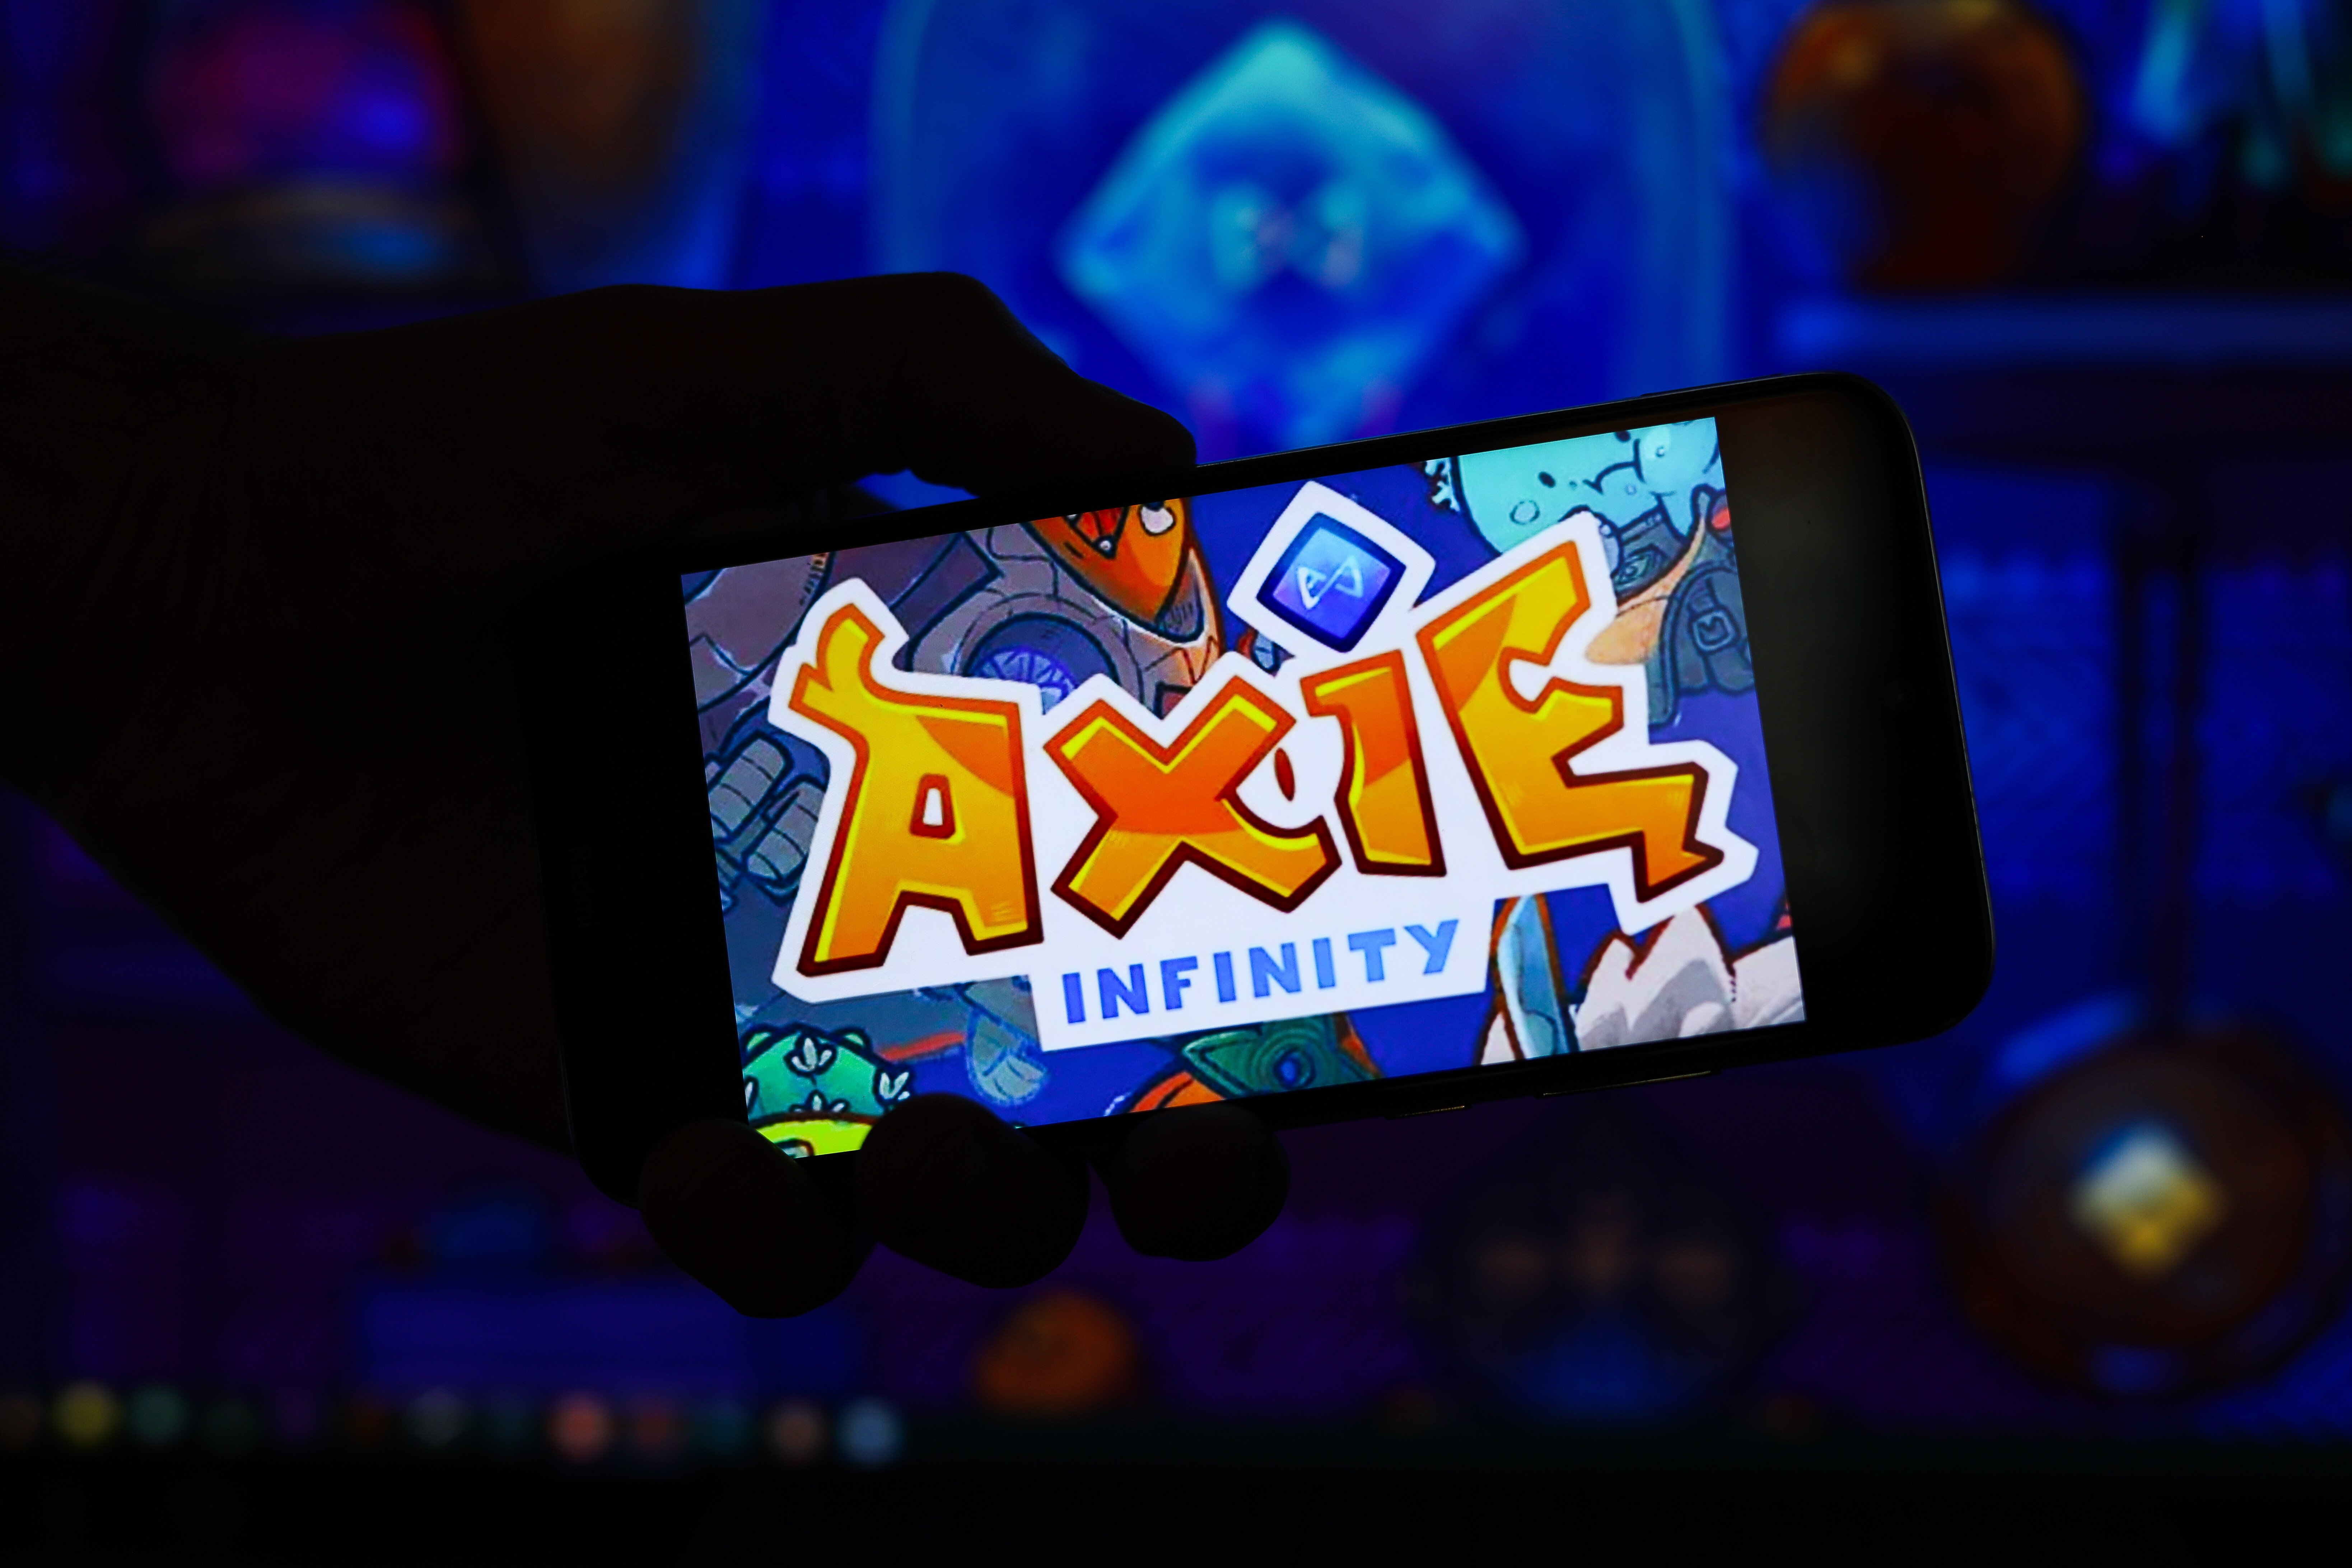 Philippine National Police Warns Citizens On Axie Infinity's Play-to-Earn  Model, Cites Security Concern